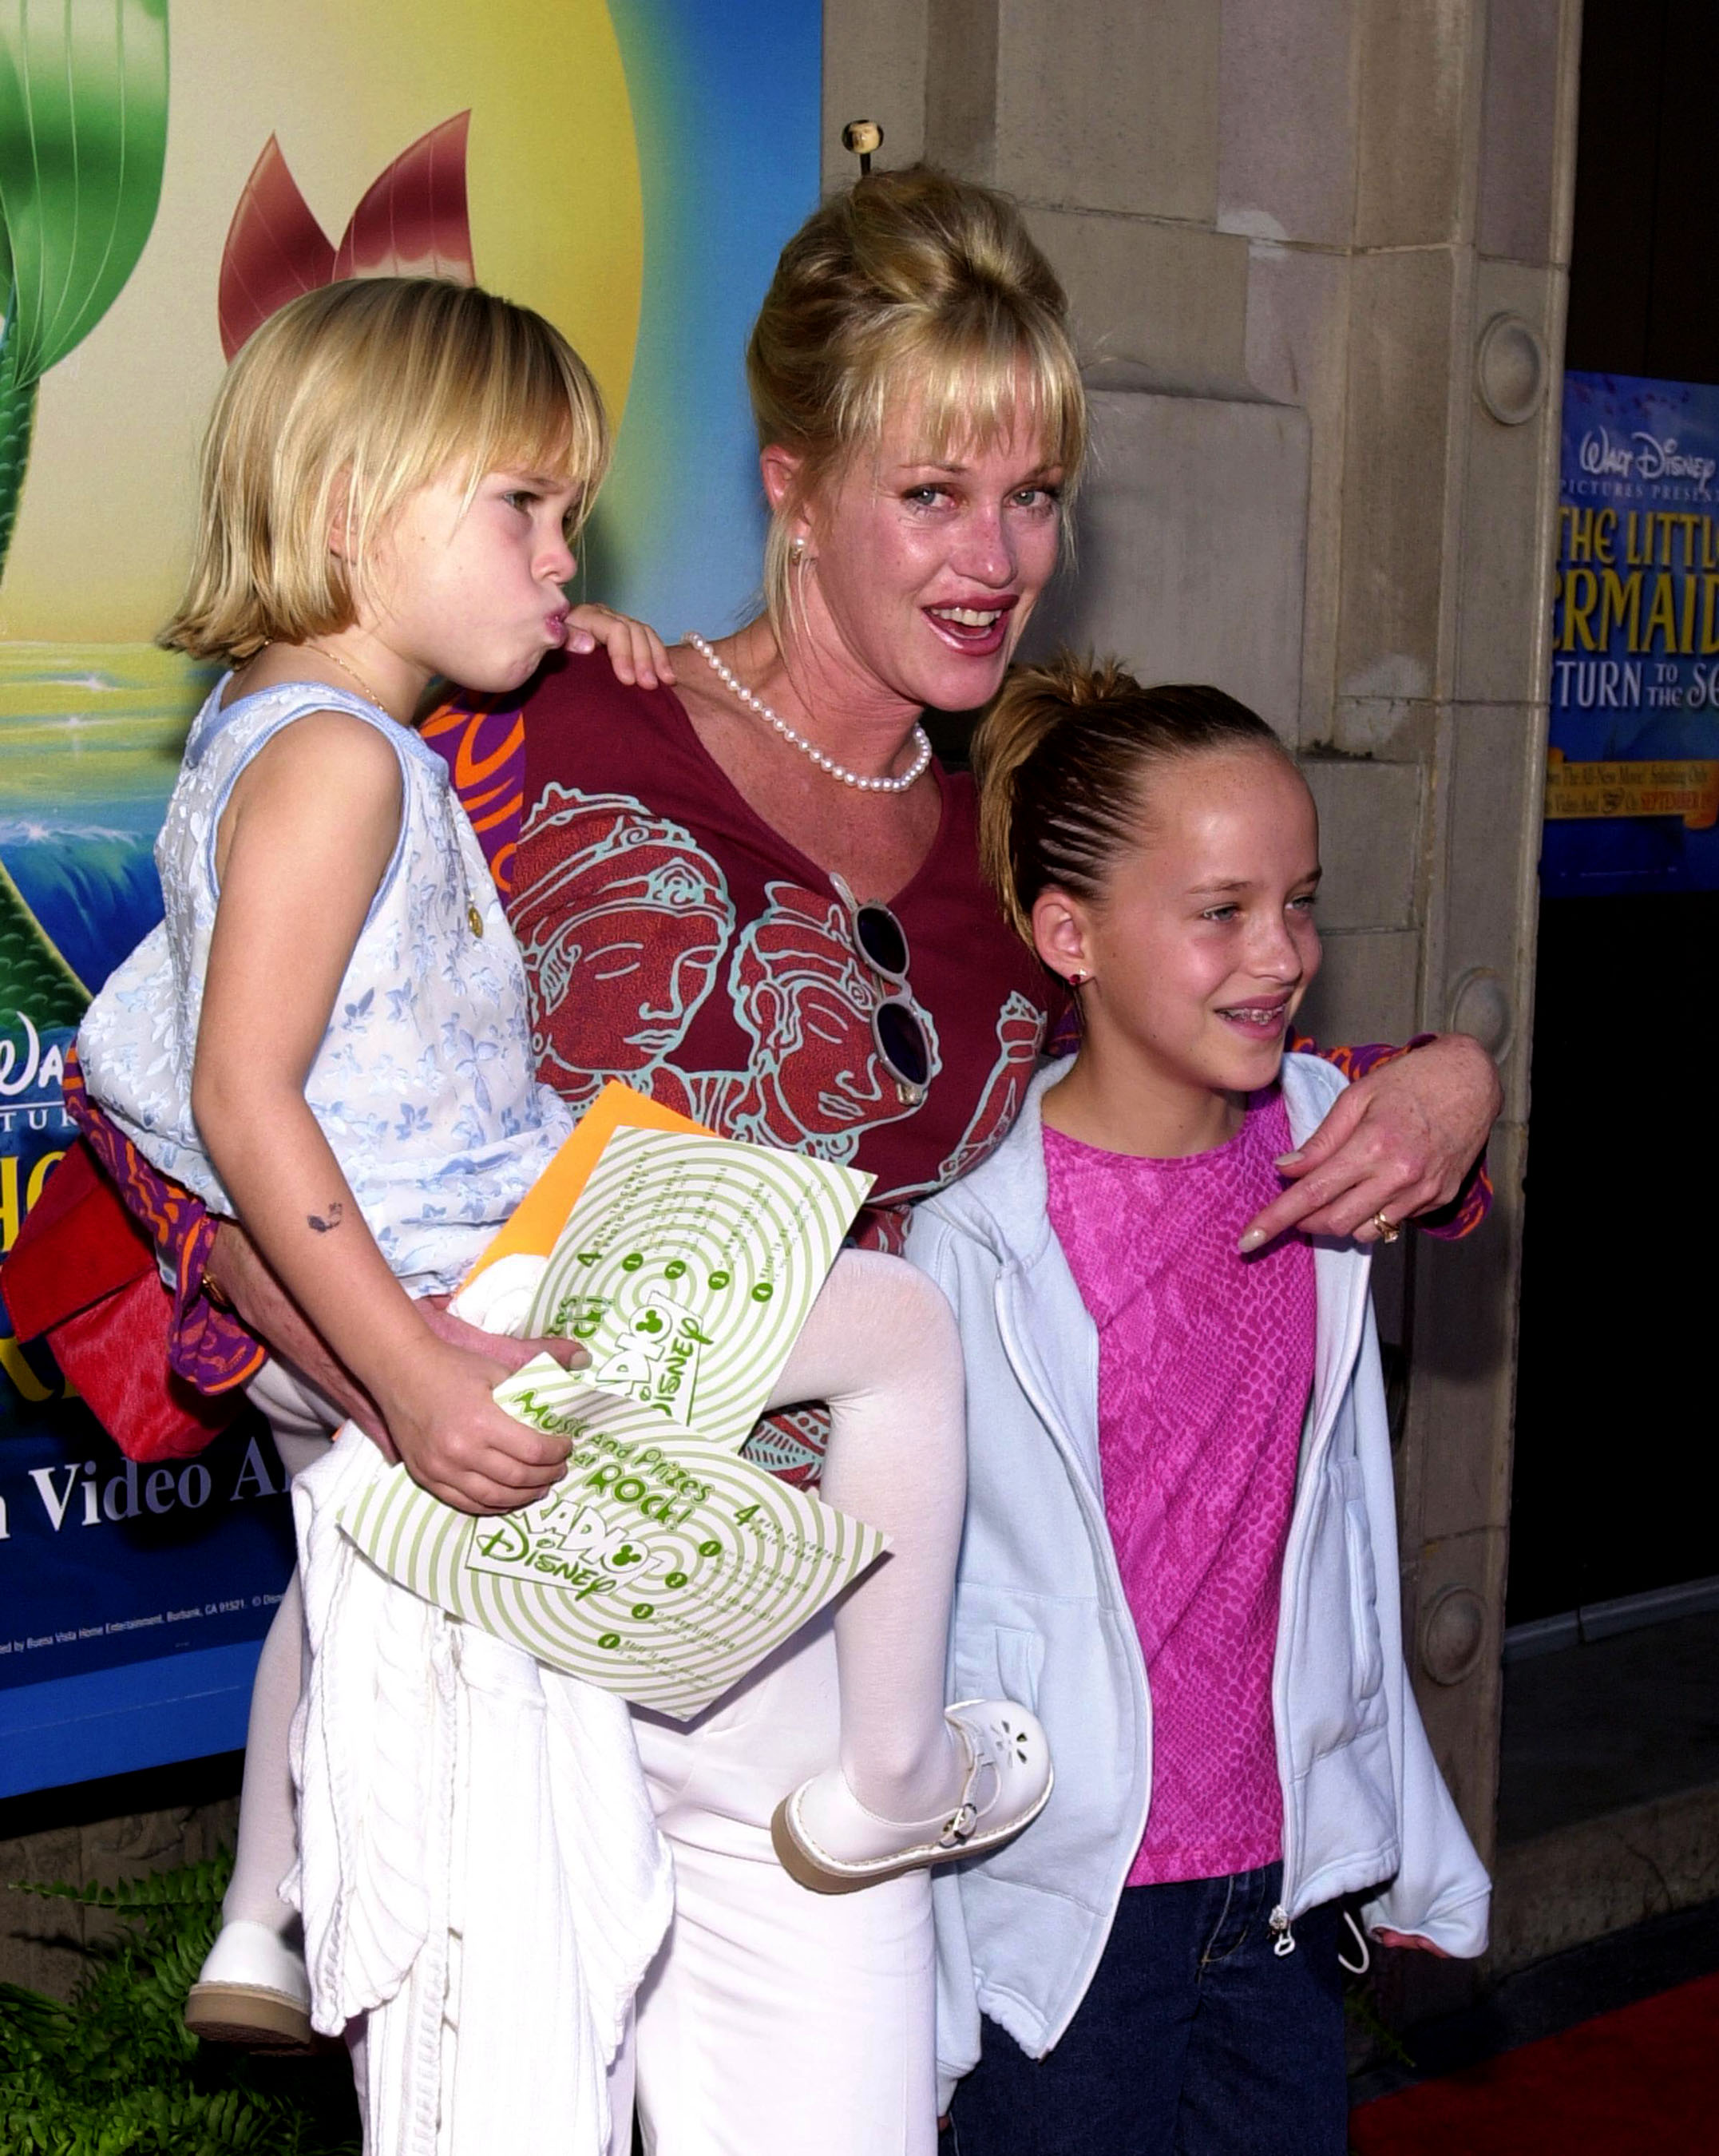 Dakota Johnson, Melanie Griffith and Stella Banderas at the premiere of "The Little Mermaid II: Return to the Sea," 2000 | Source: Getty Images